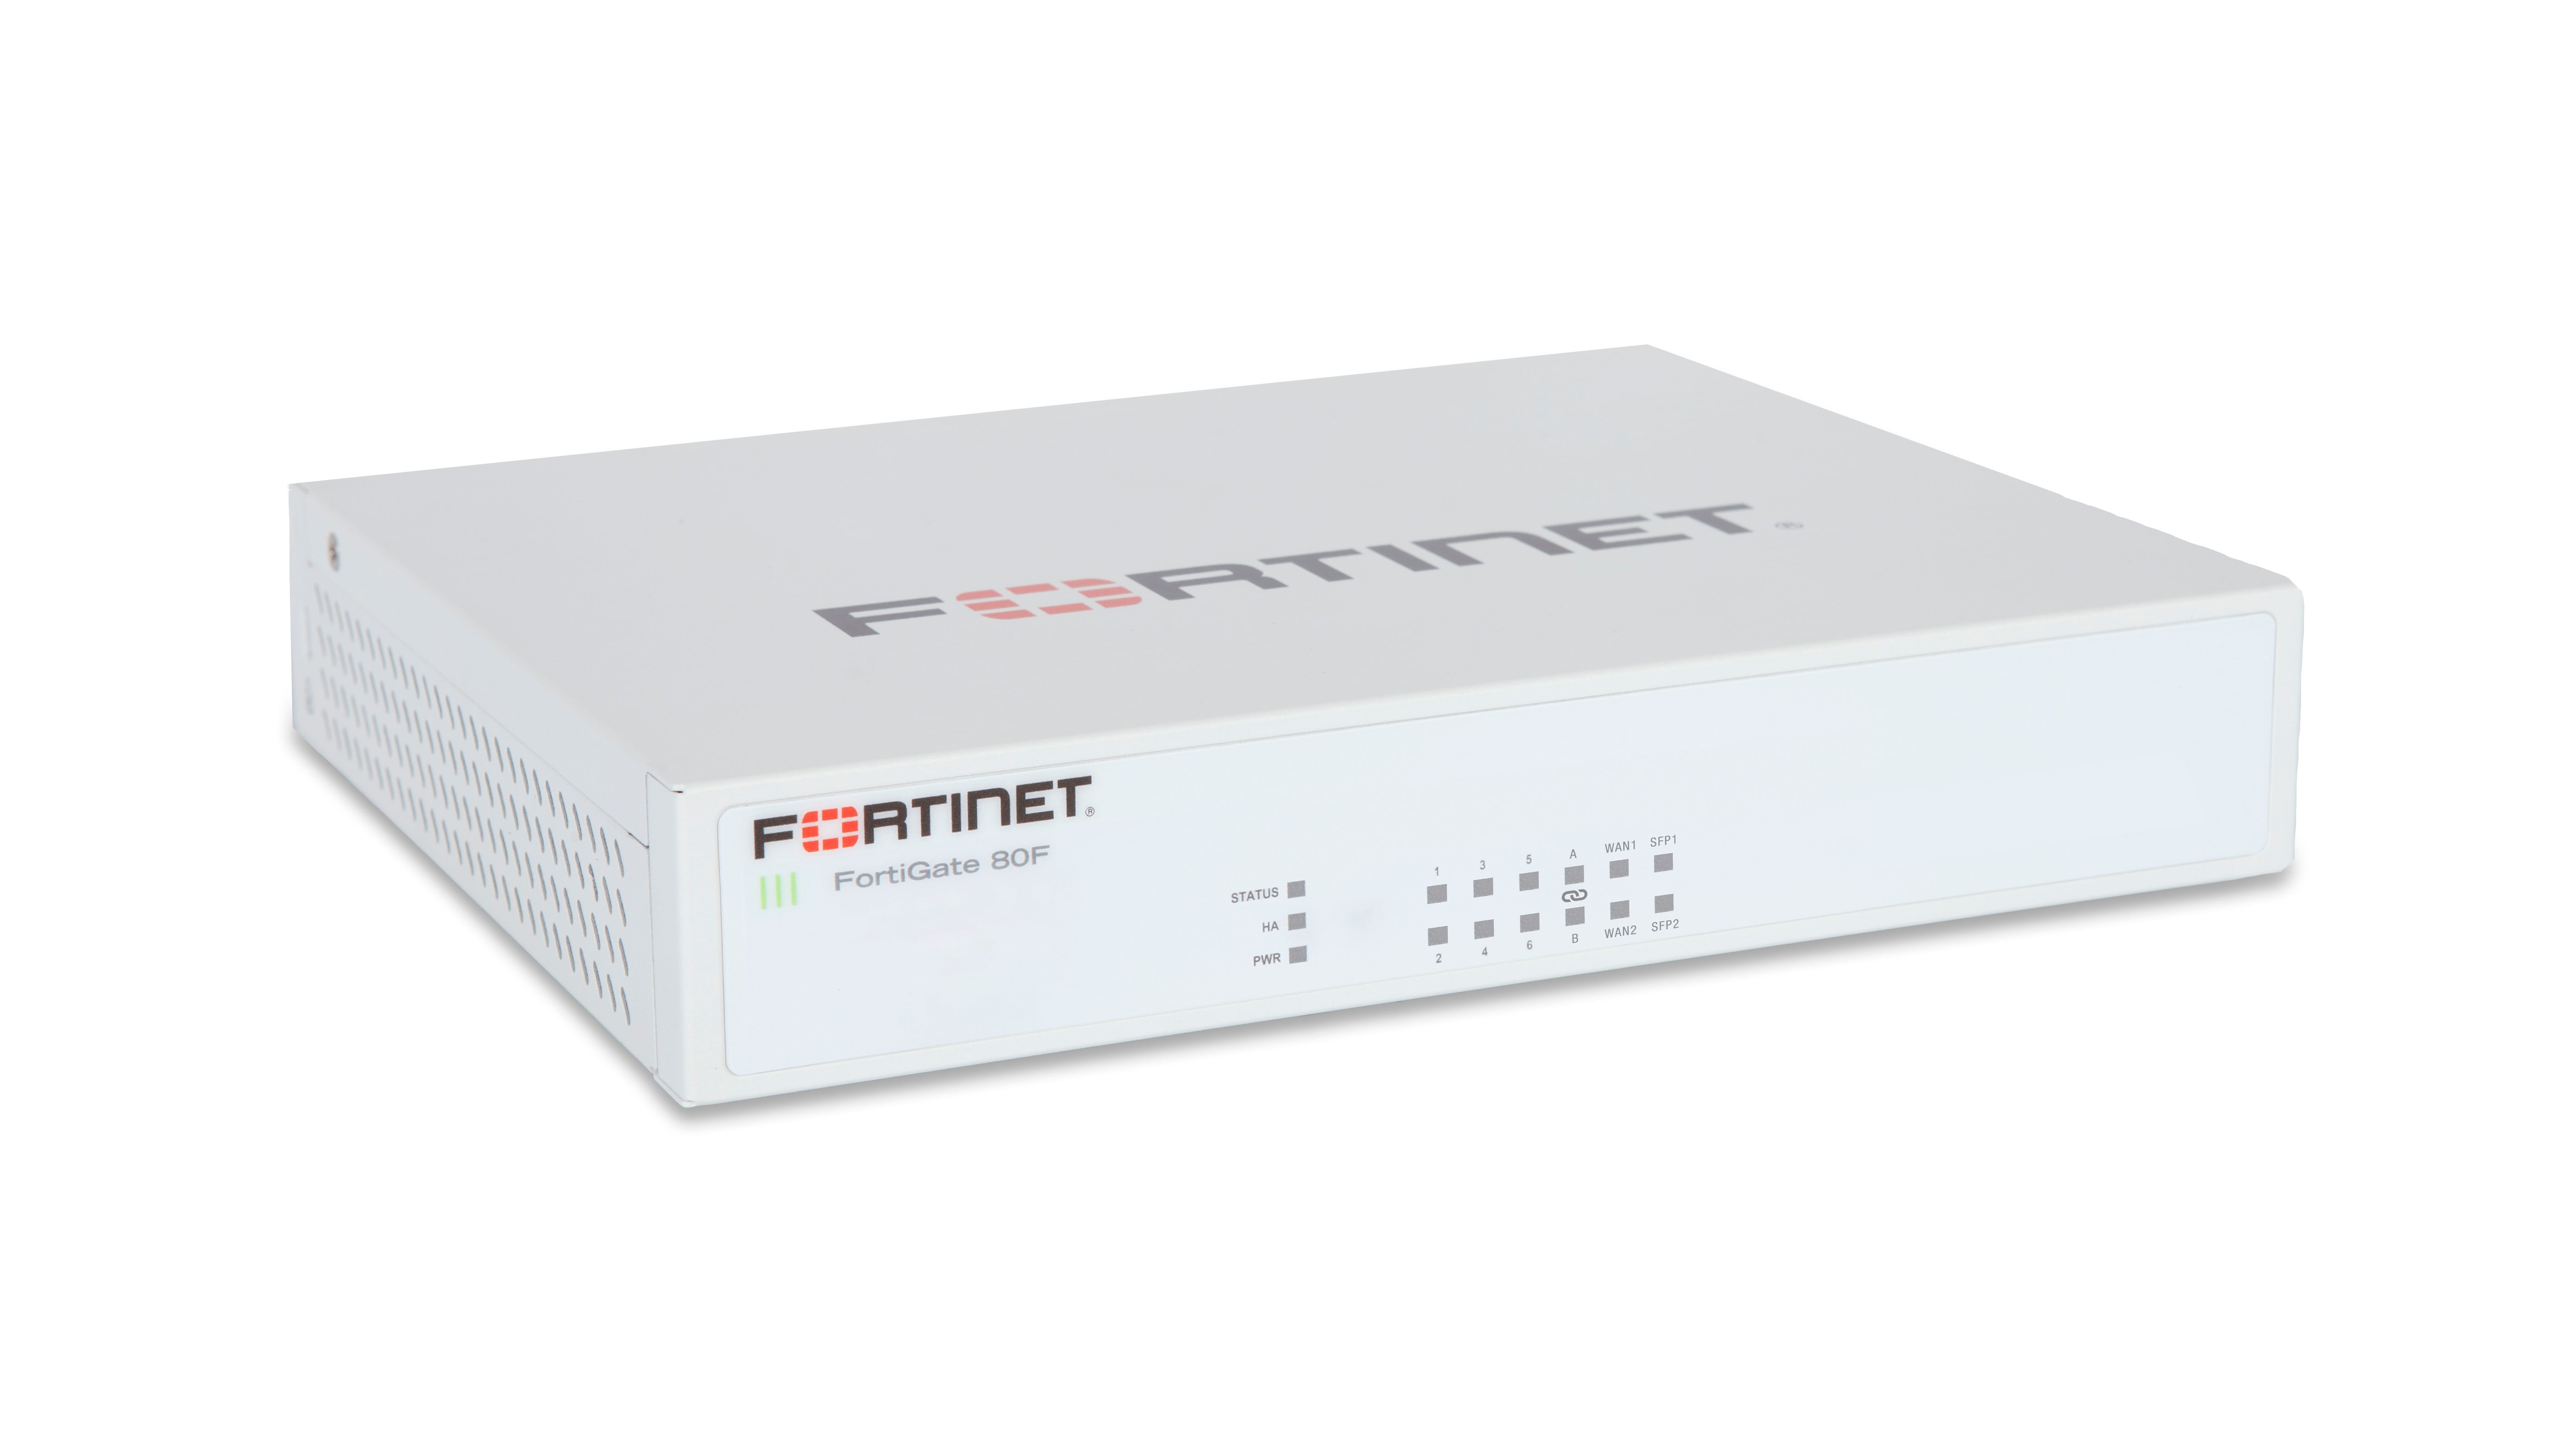 FORTINET FORTIGATE 80F + UNIFIED THREAT PROTECTION (UTP)